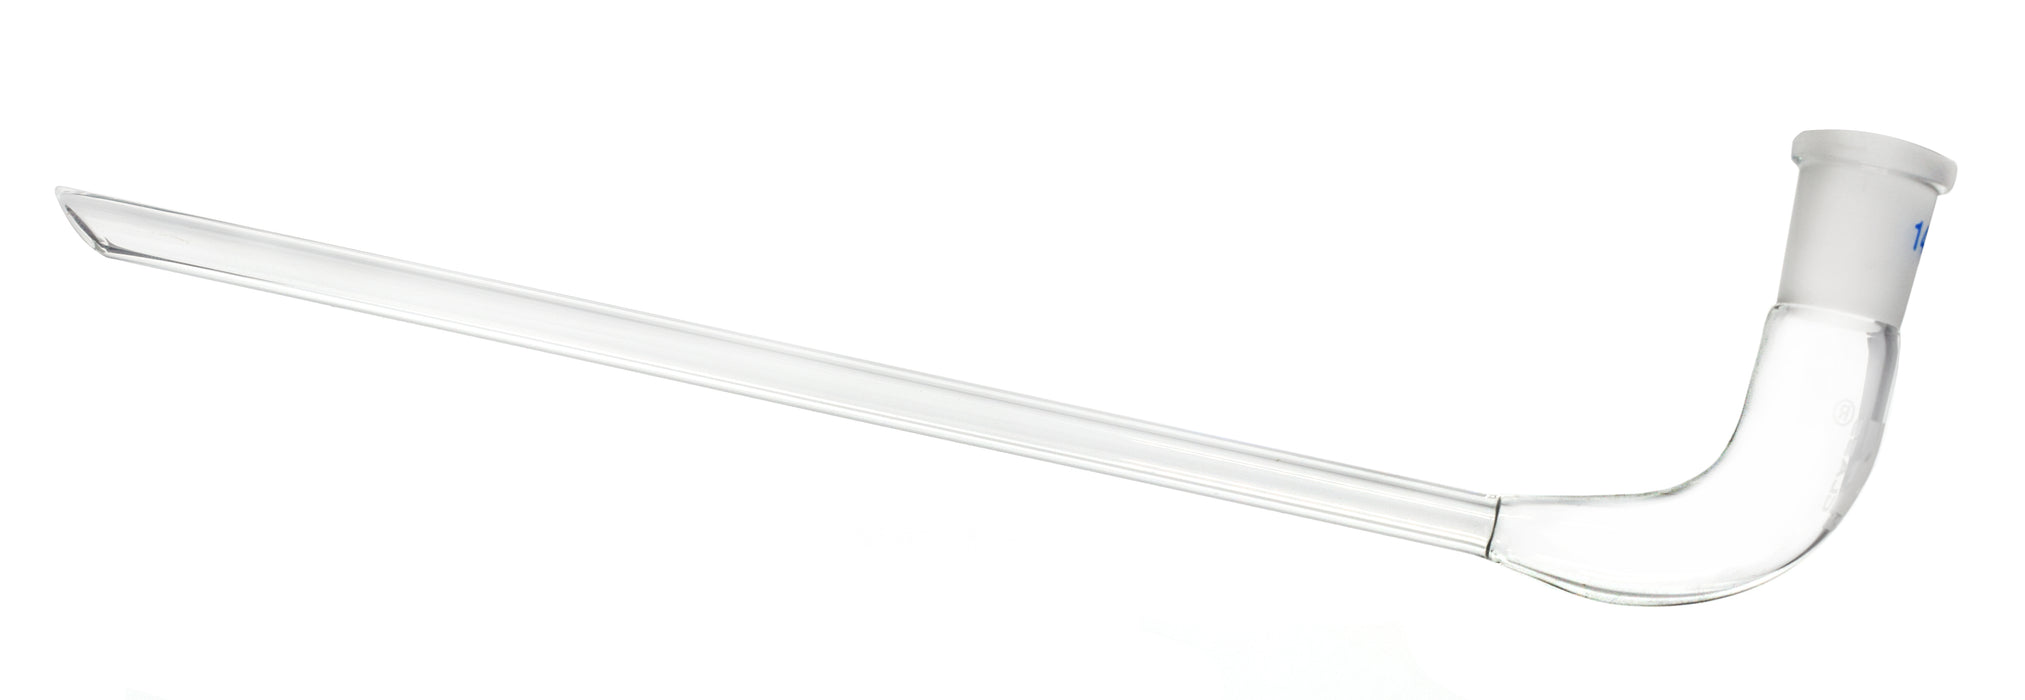 Receiver Delivery Adaptor, Long Stem - Socket Size: 14/23 - Body Length, 65mm - Borosilicate Glass - Eisco Labs